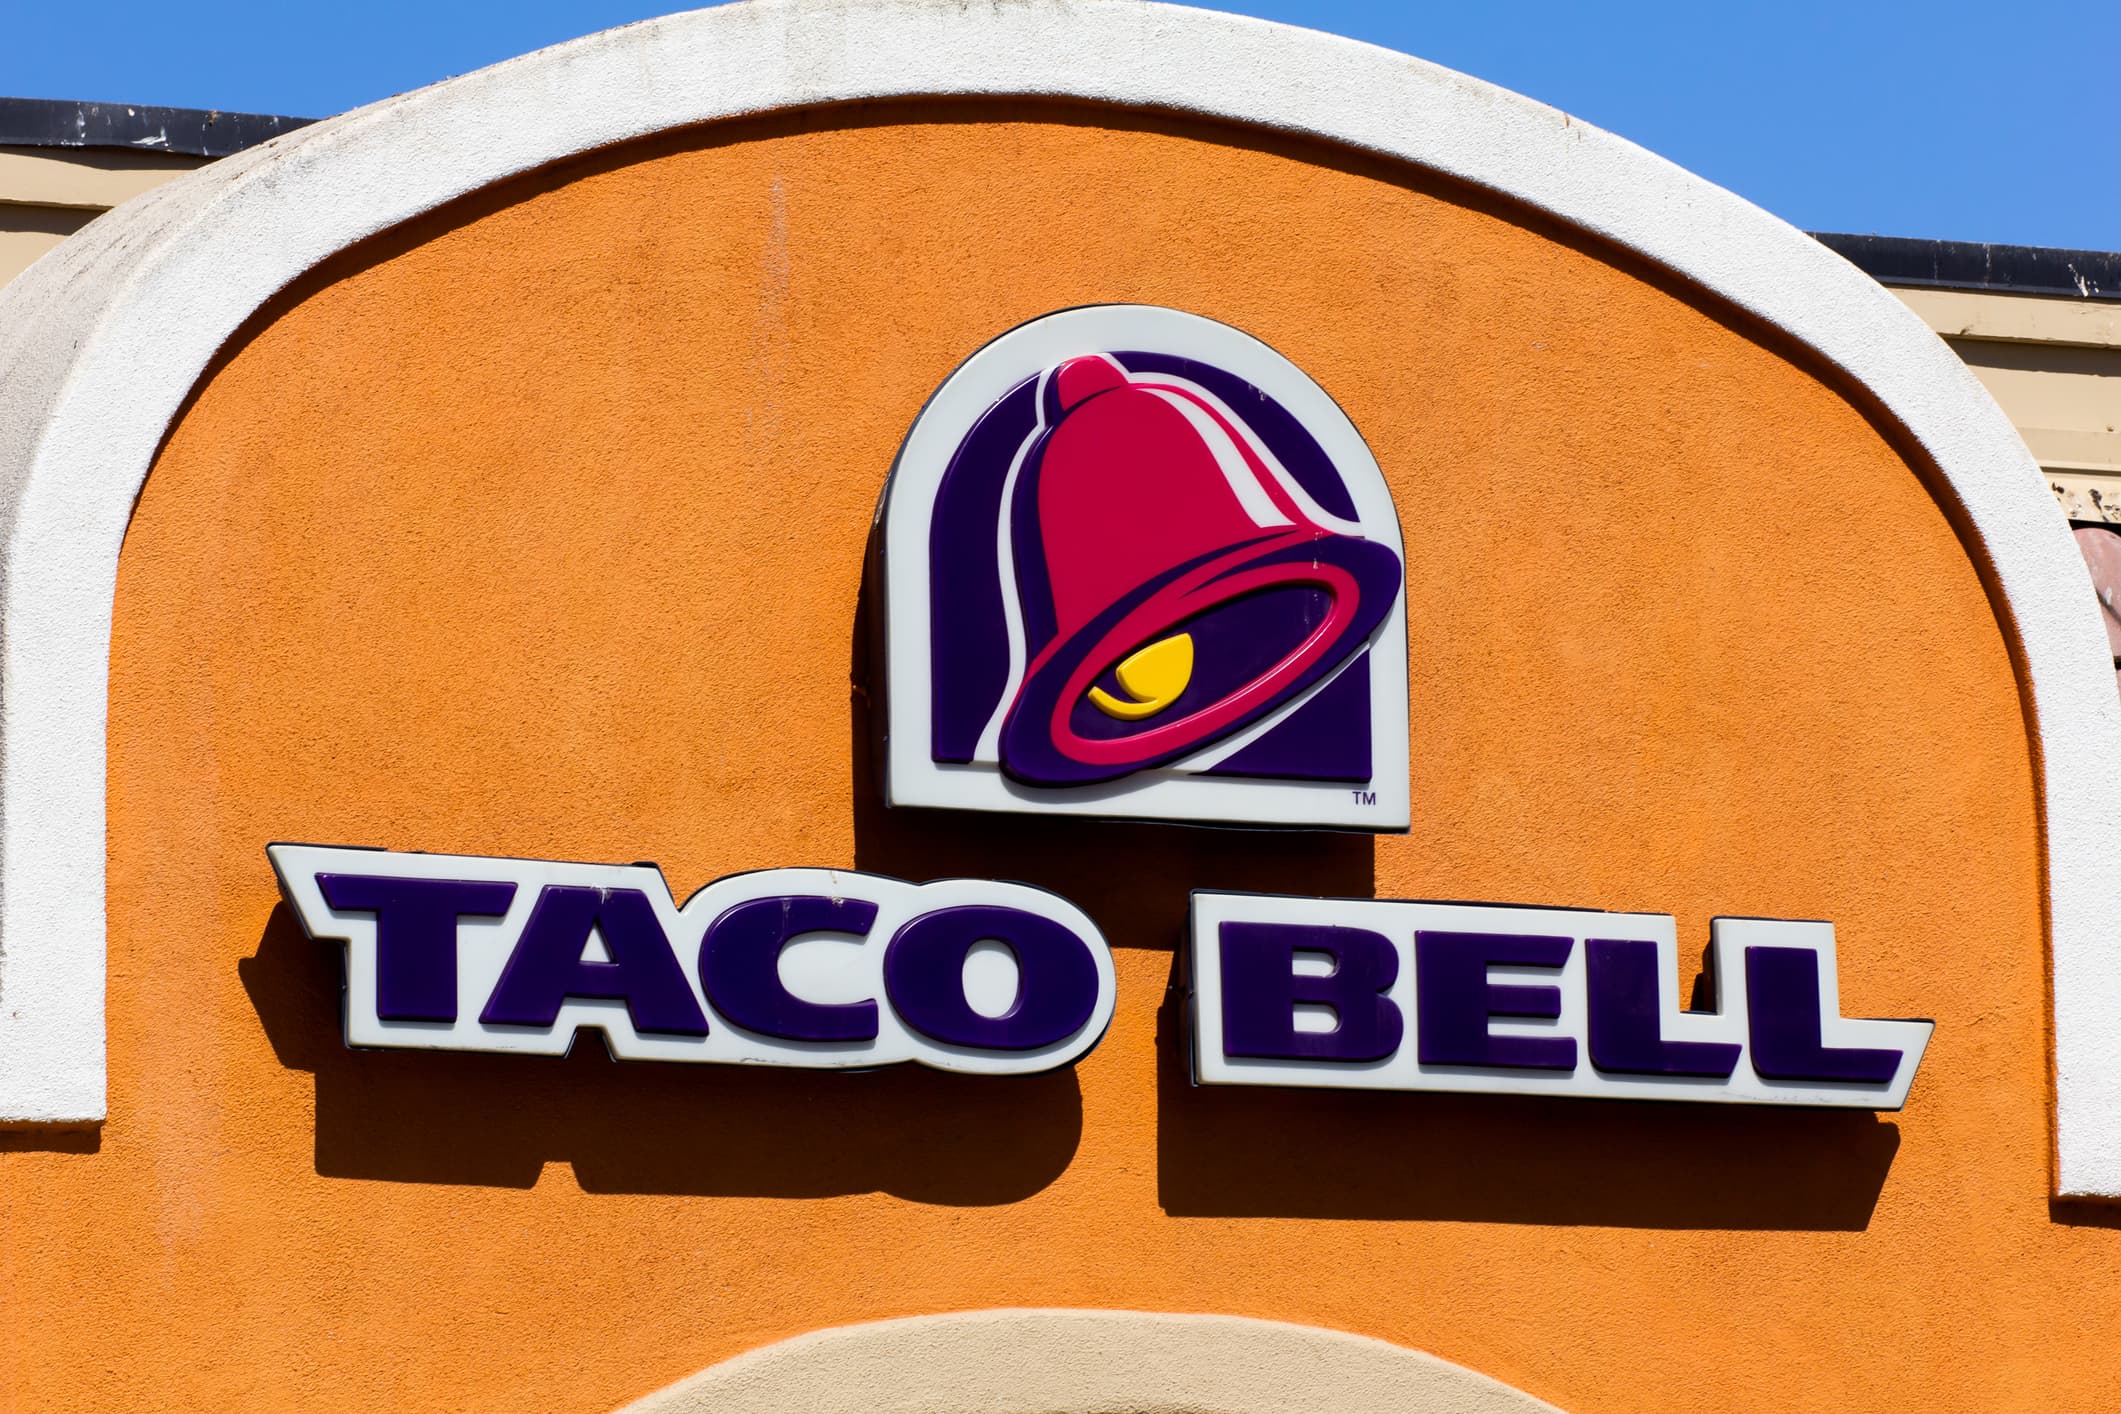 A street view of a Taco Bell restaurant logo in California.